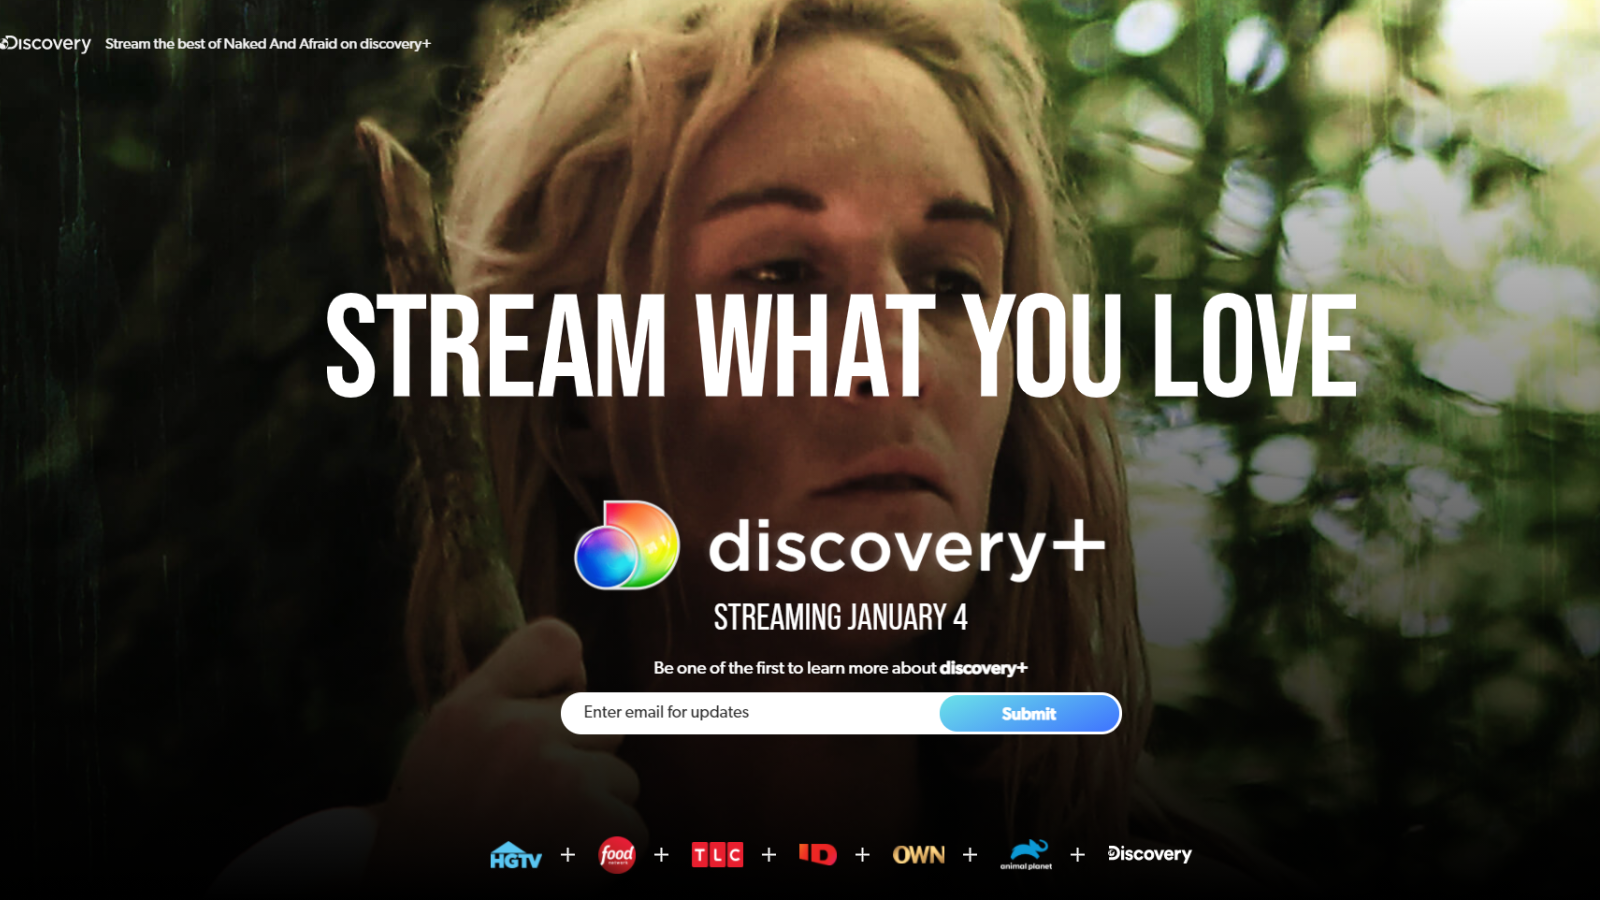 fishing shows on discovery plus